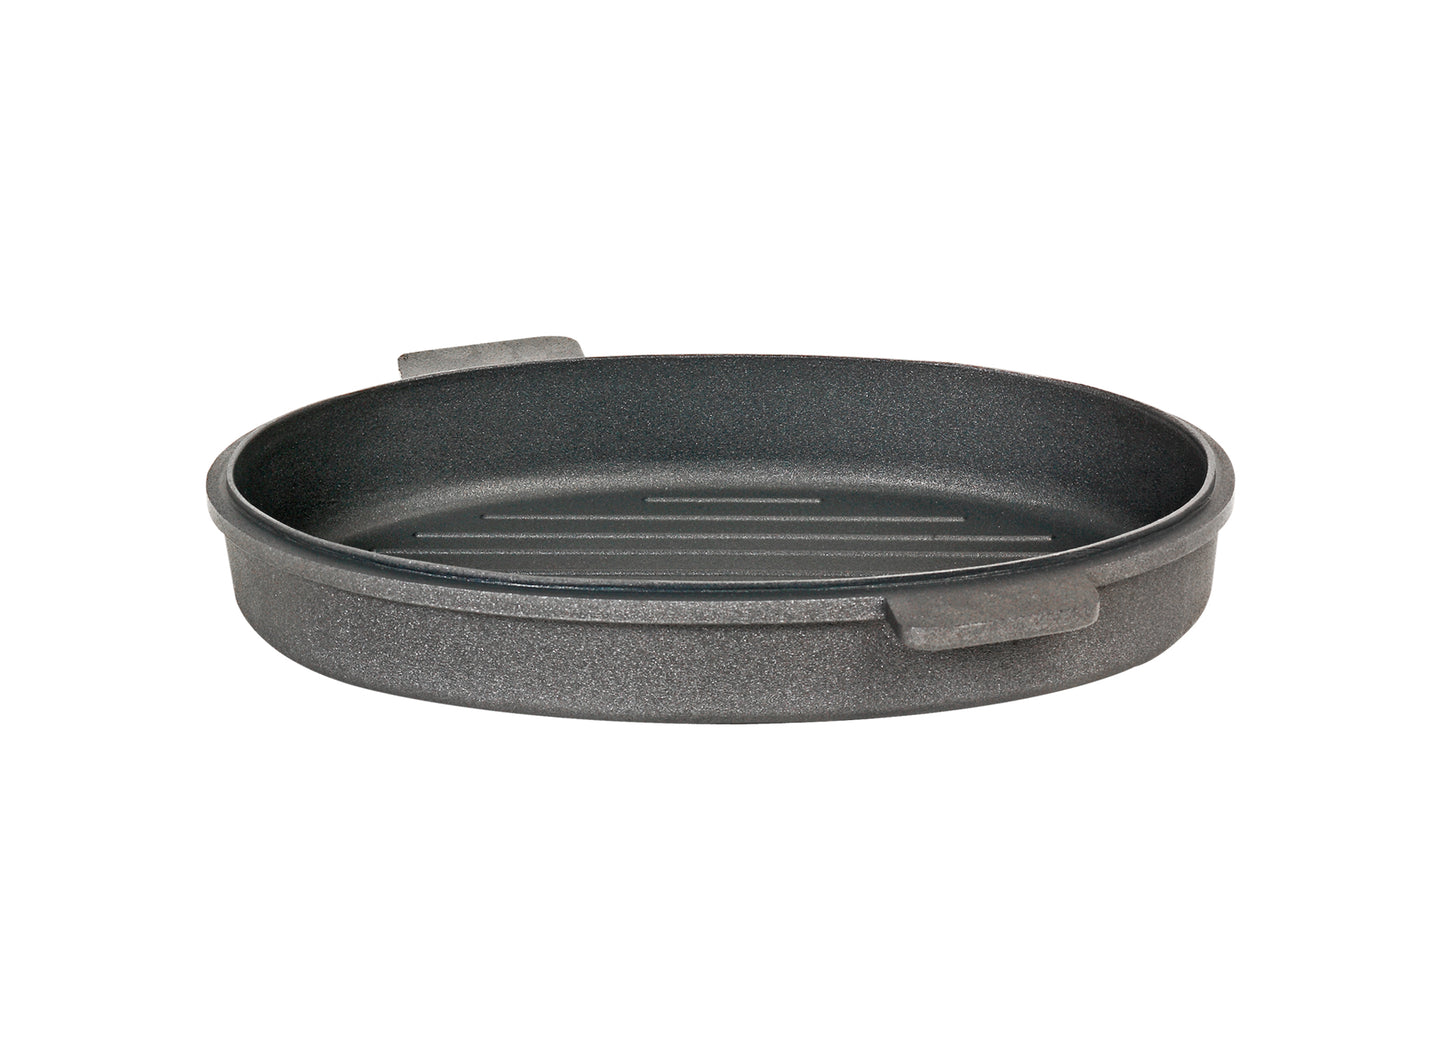 Series 7 - Titan Induction 2 Handled Cast Fish Frying Pan - Fixed Handle